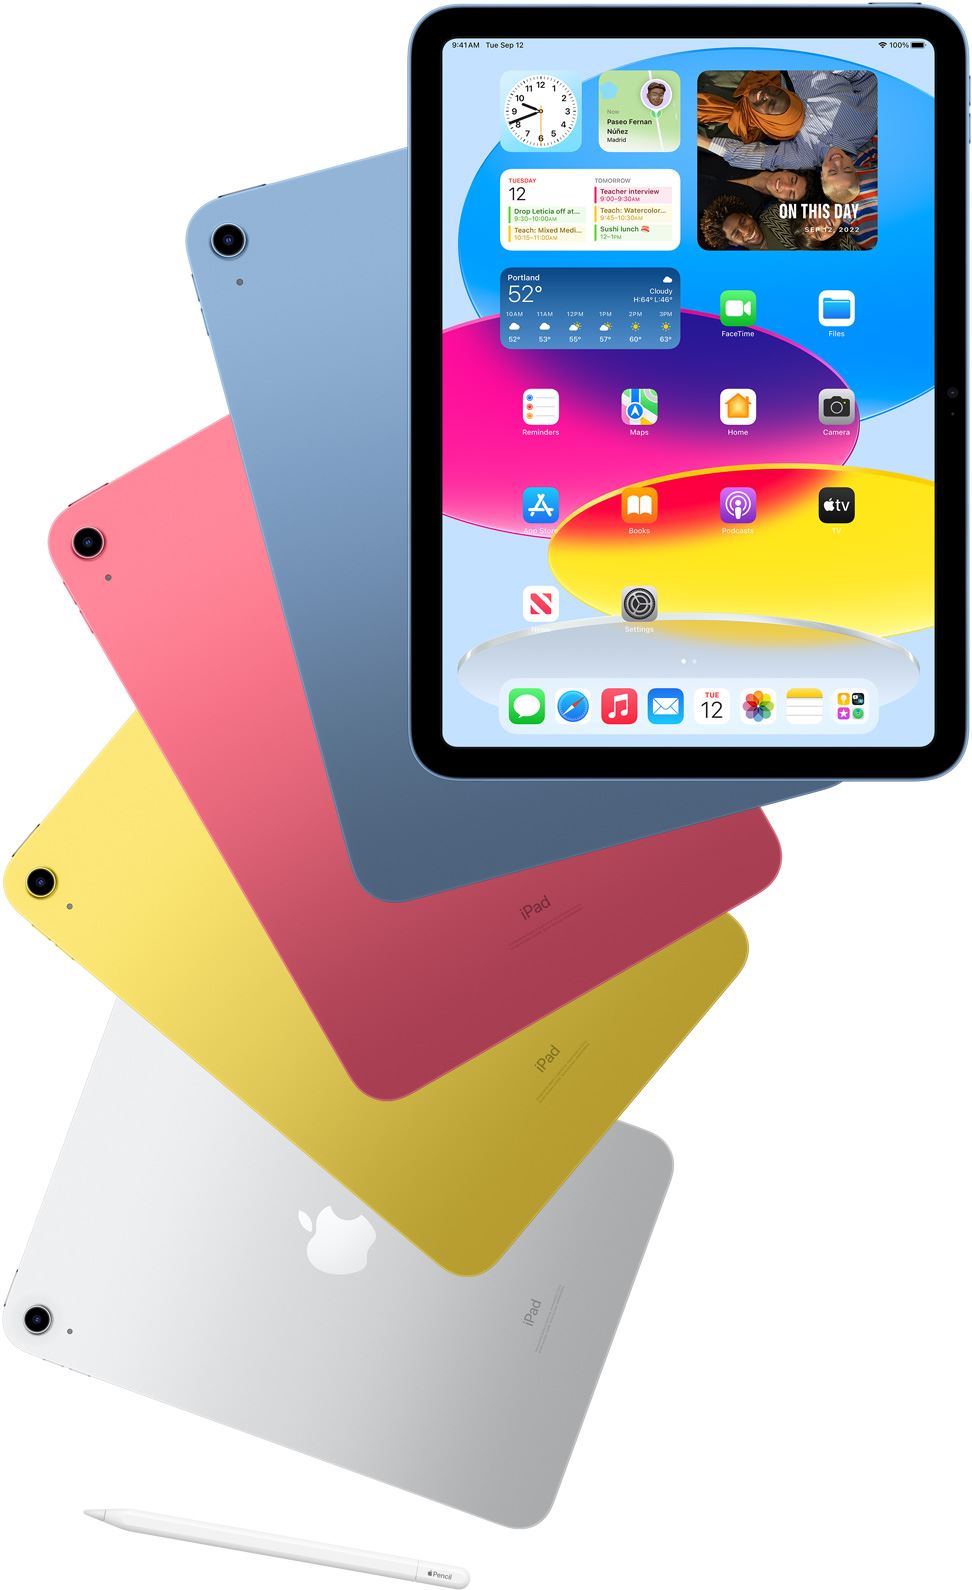 Front view iPad shows the home screen with blue, pink, yellow, and silver rear-facing iPads. An 戦国 カグラ スロット Pencil sits nears the arranged iPad models.